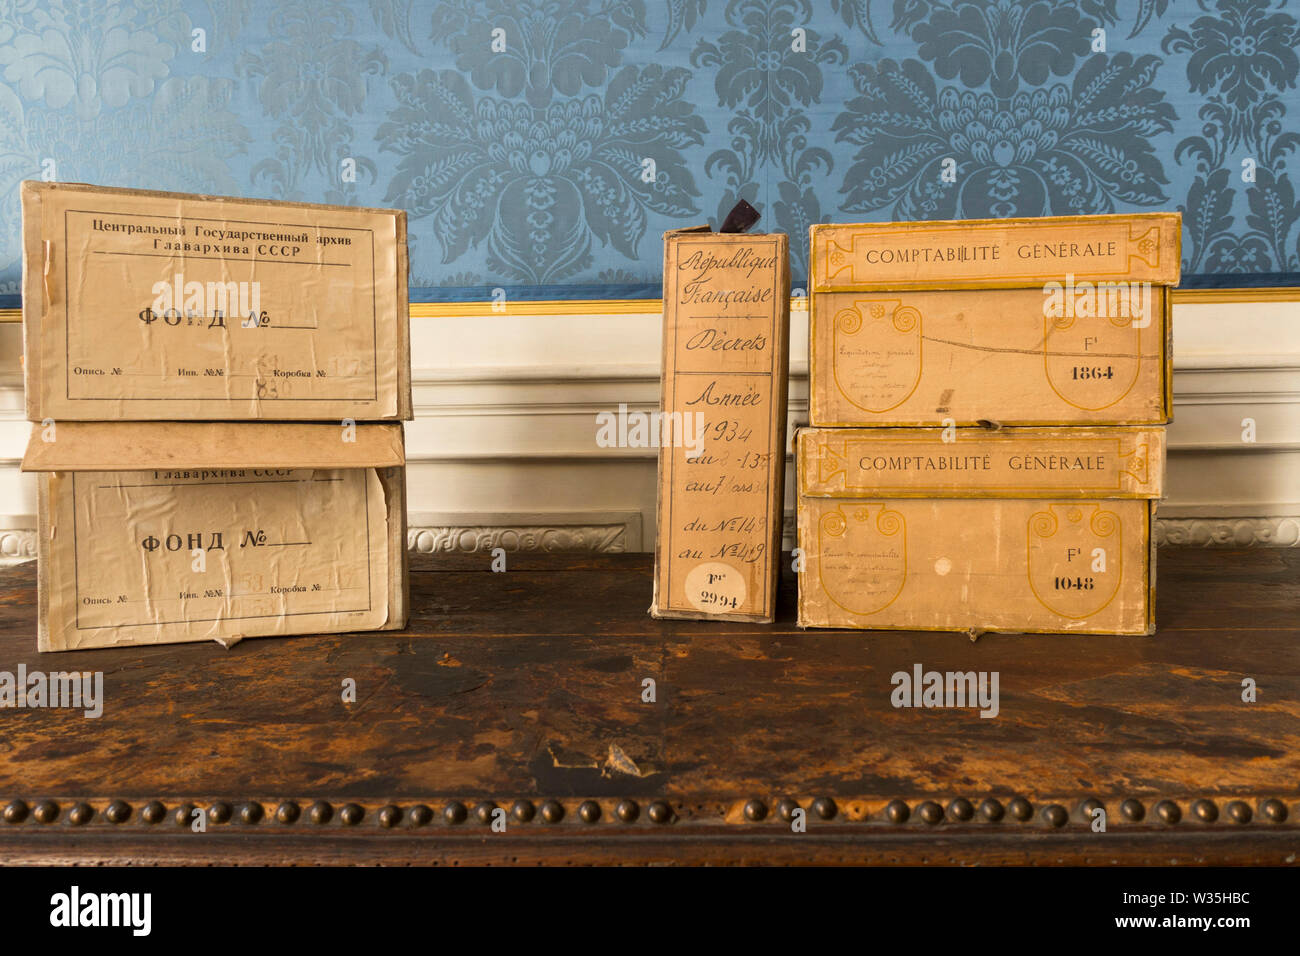 Antique boxes in Interior of National Archives Building, former Hotel de Soubise, museum of french history, Paris, France. Stock Photo